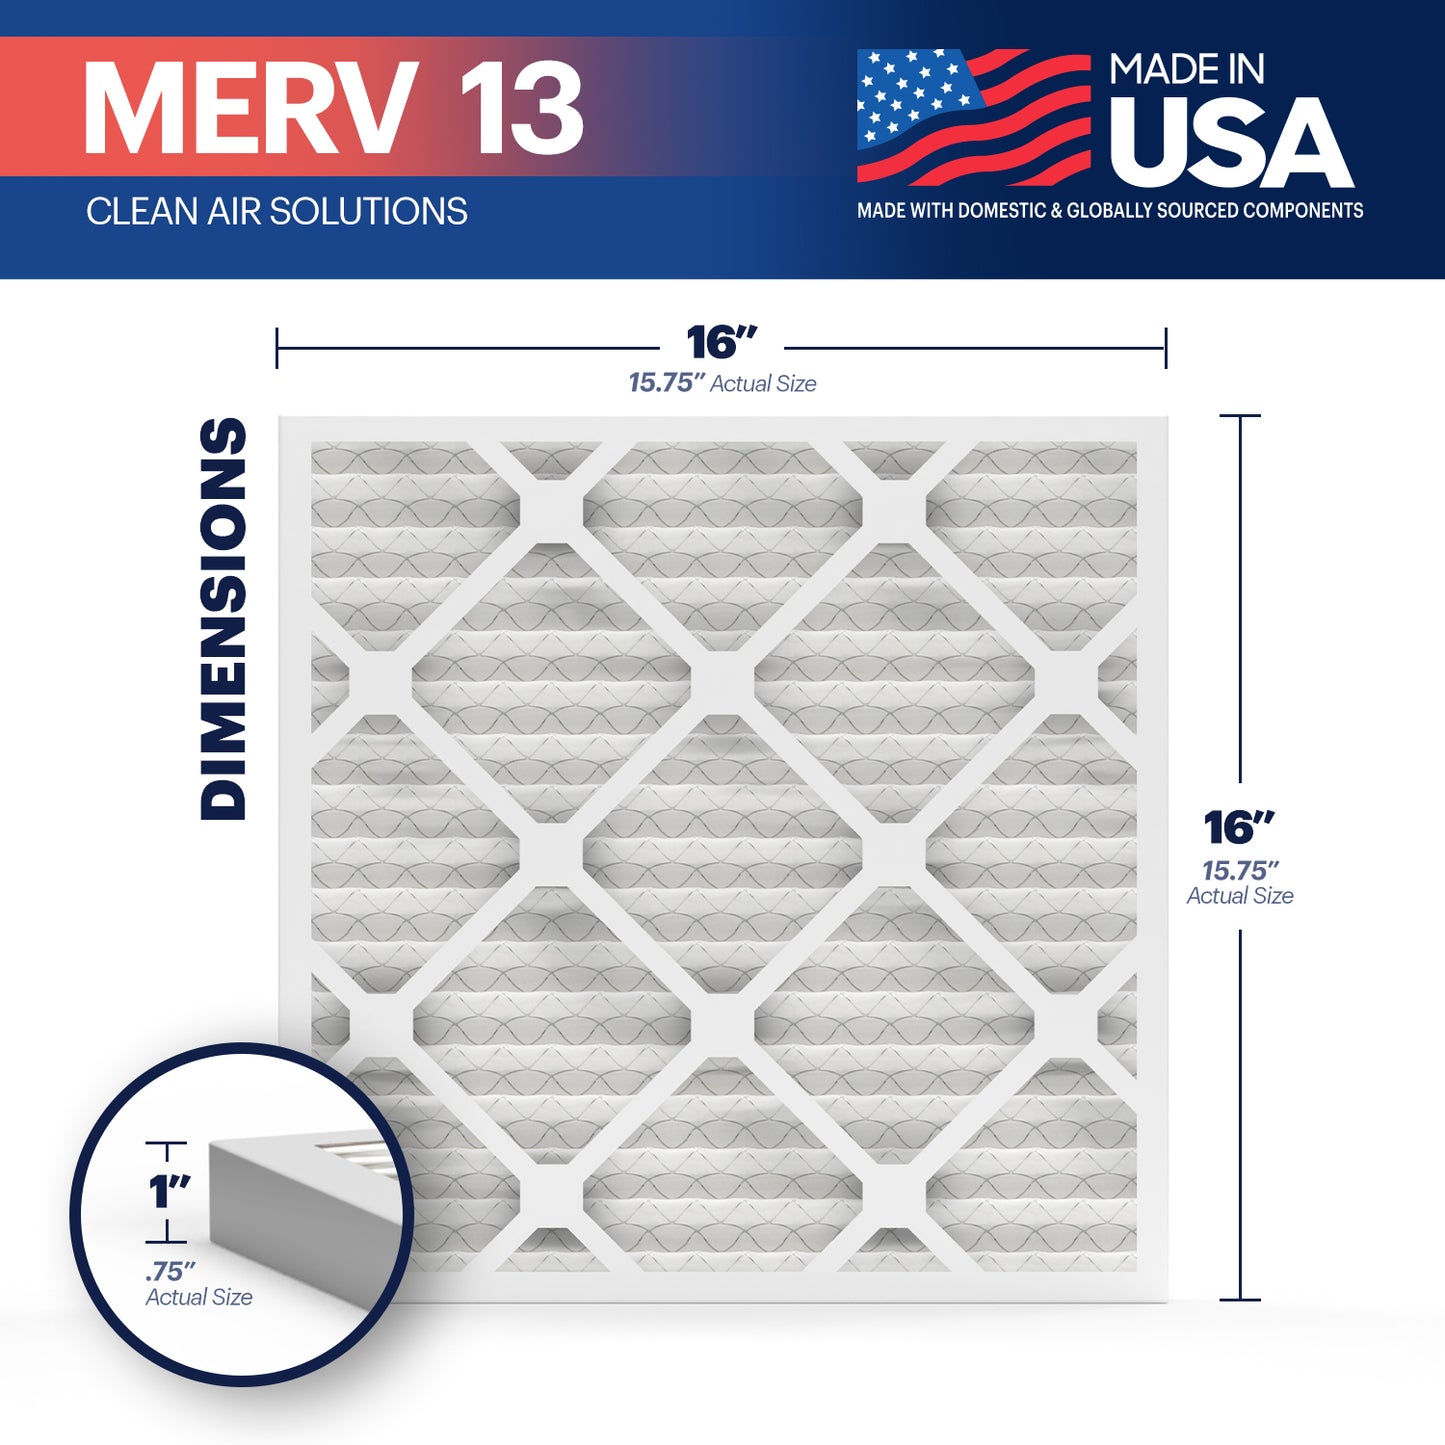 BNX TruFilter 16x16x1 MERV 13 Pleated Air Filter – Made in USA (6-Pack)